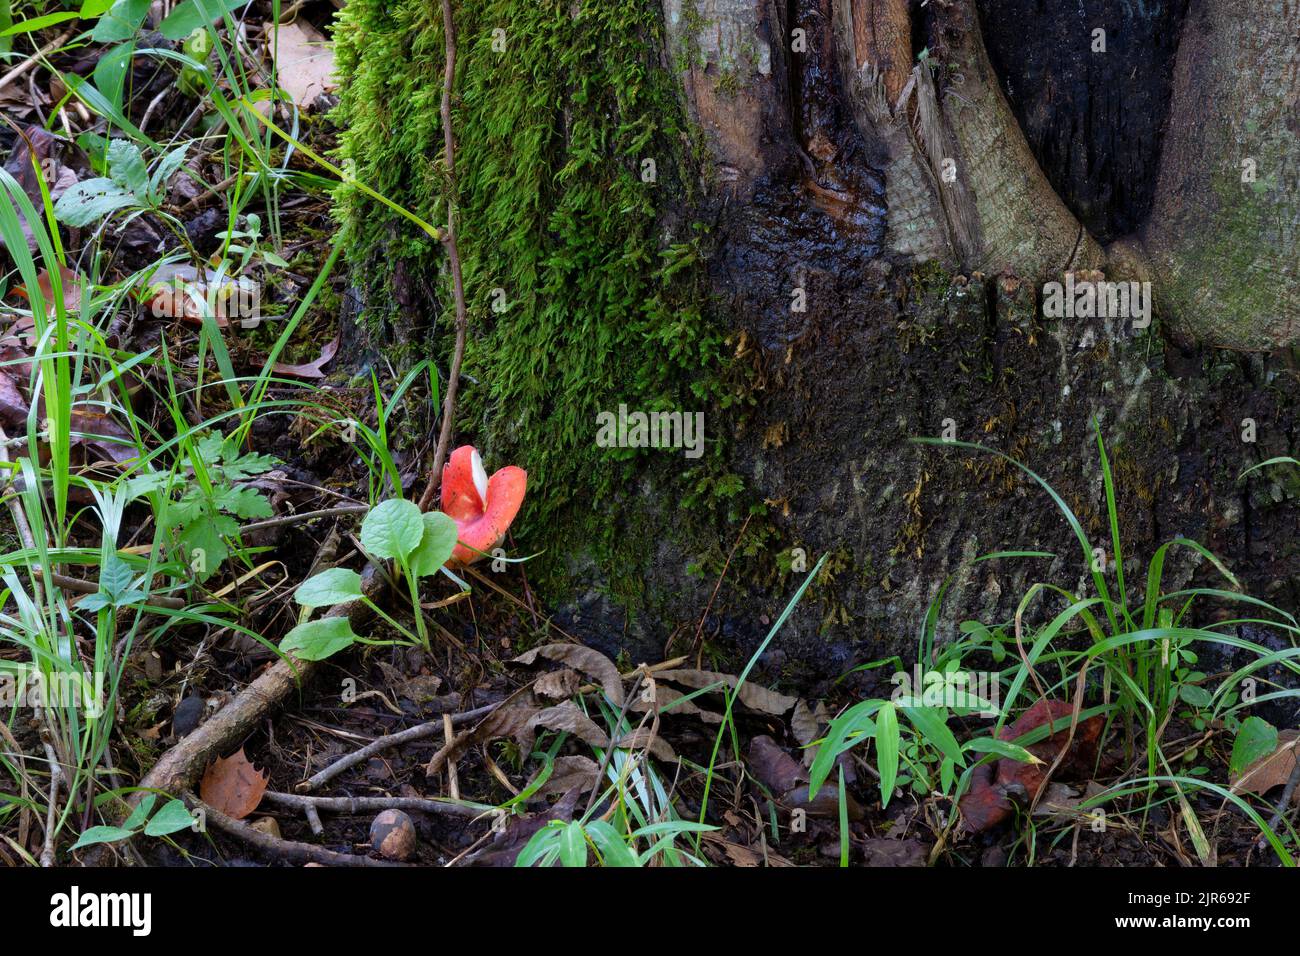 At the base of a tree amongst other plants grows a red Russula Mushroom. in Tennessee Stock Photo